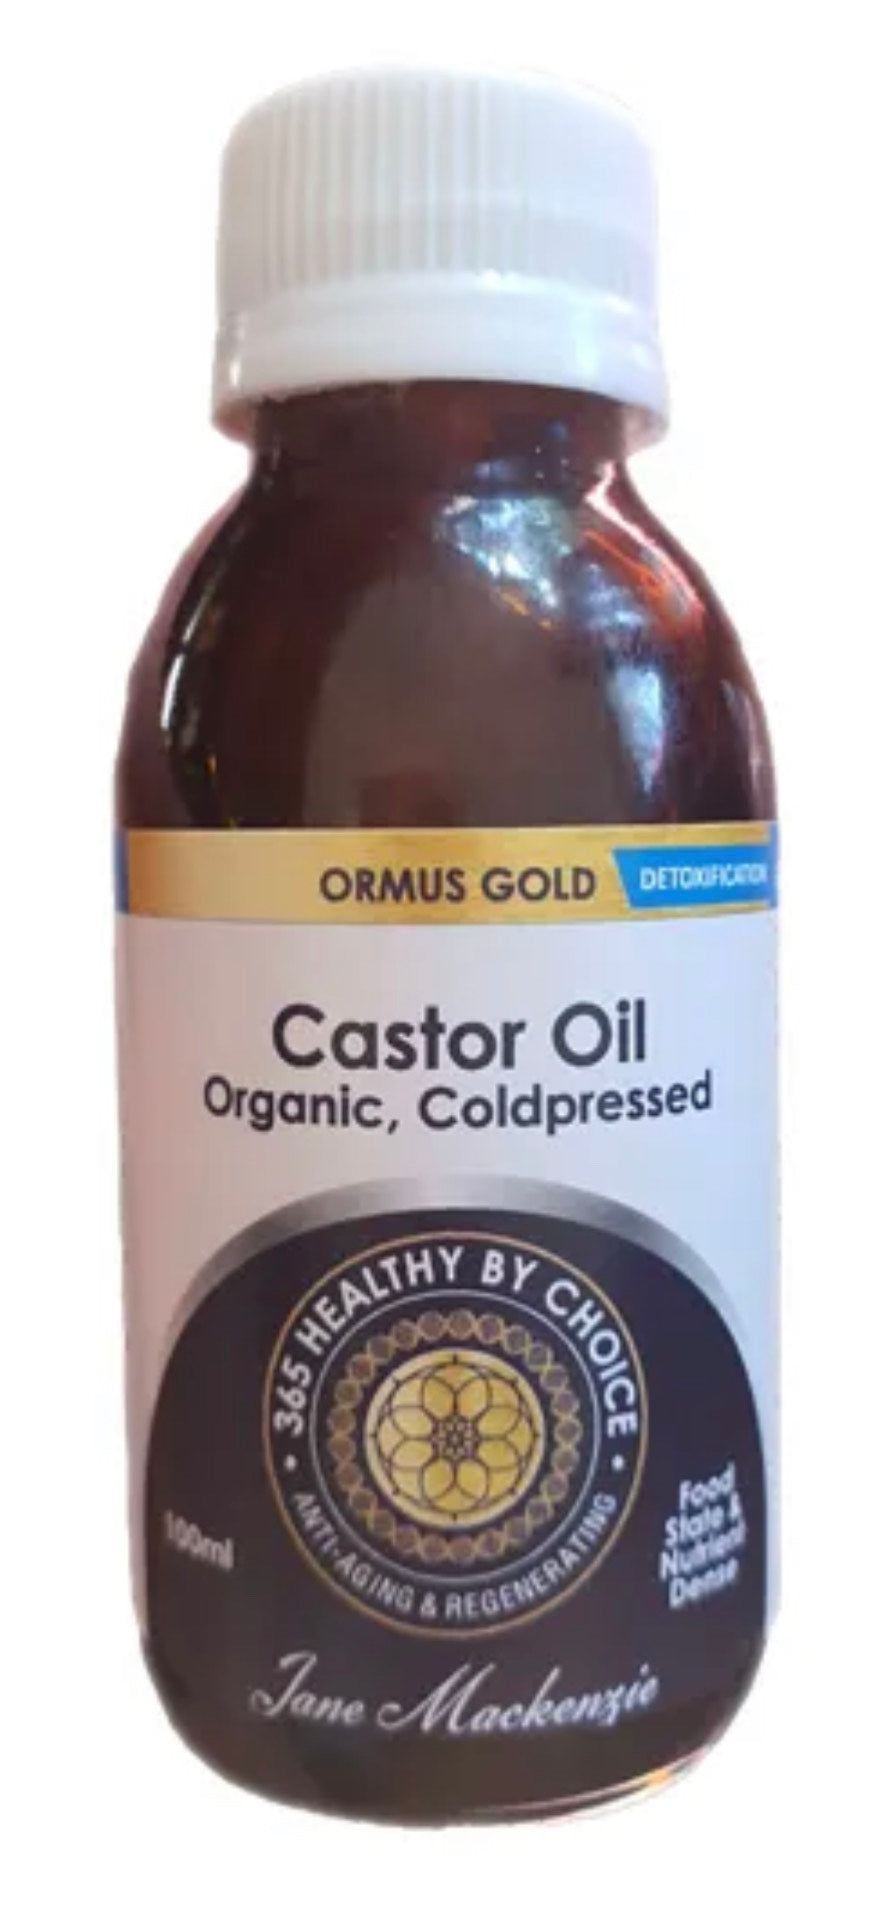 365 Healthy By Choice Organic Castor Oil (Hexane-Free and Cold-Pressed) 100ml